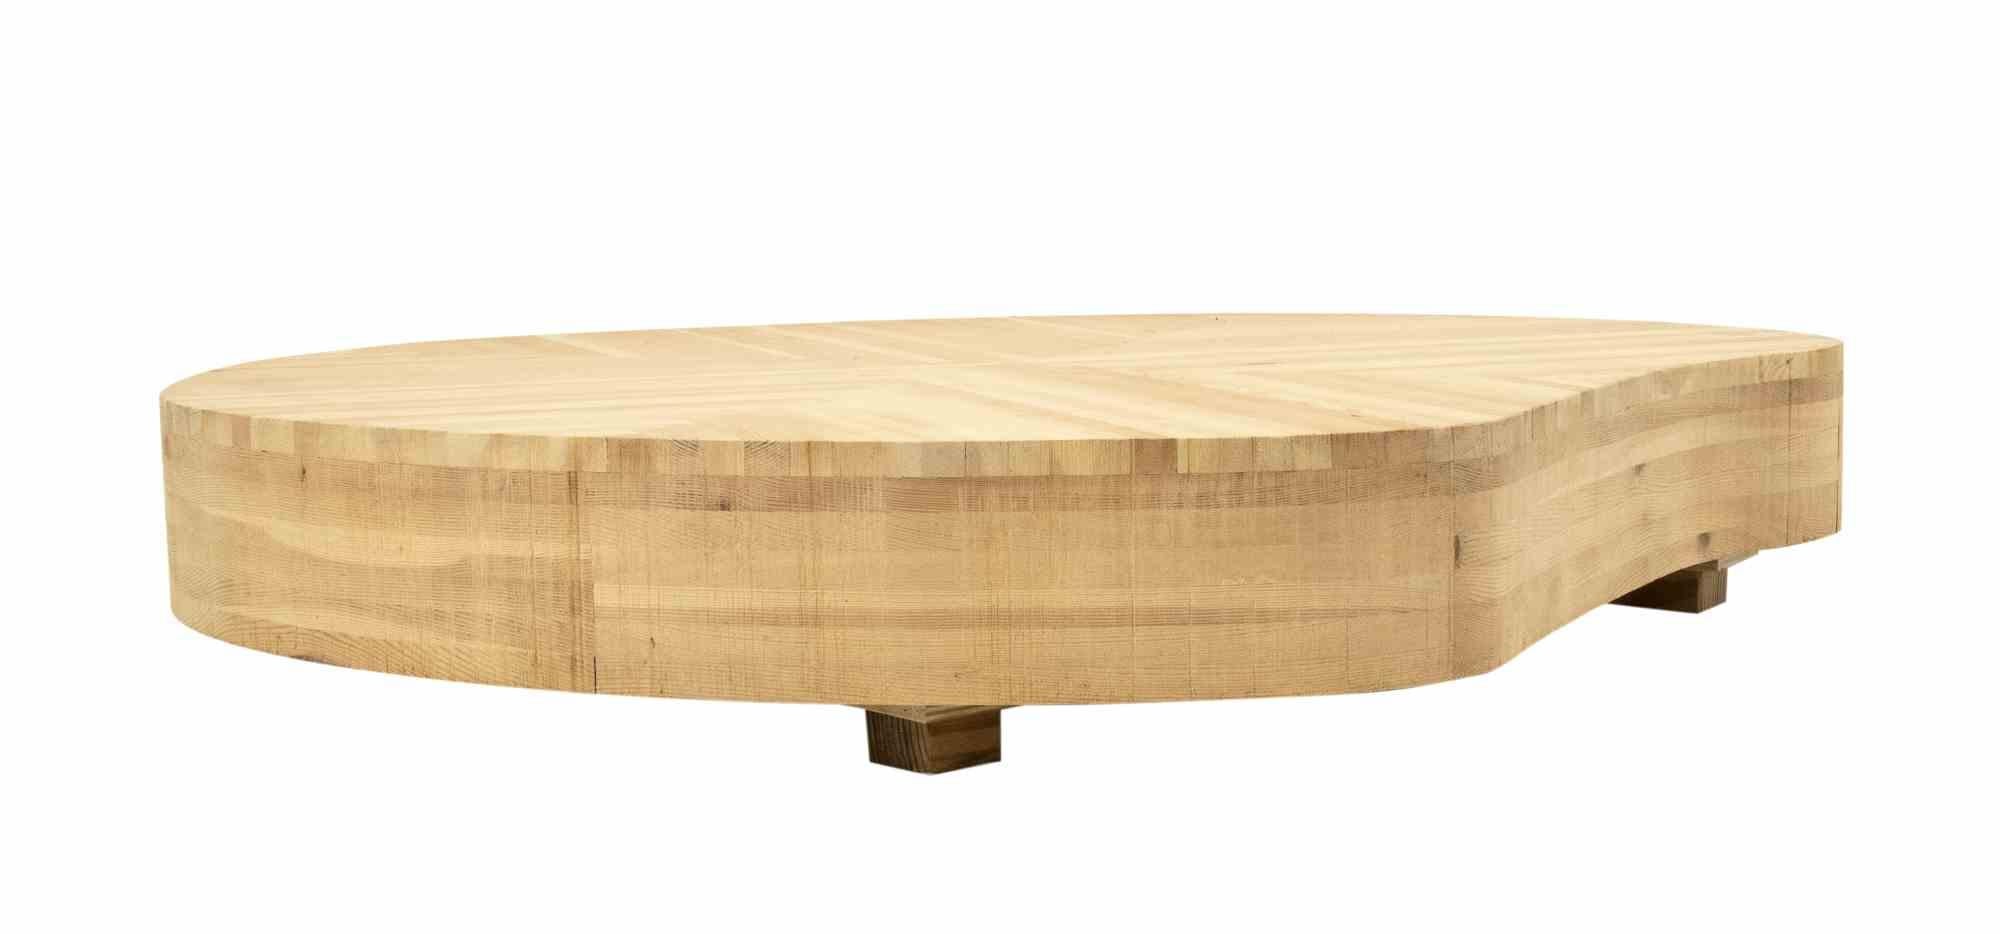 A beautiful coffee table by Italian artist Mario Ceroli. 

All furniture is made of Pine of Russia (a feature that characterizes the creations in wood of the master Mario Ceroli)

Linea Mobili nella Valle.